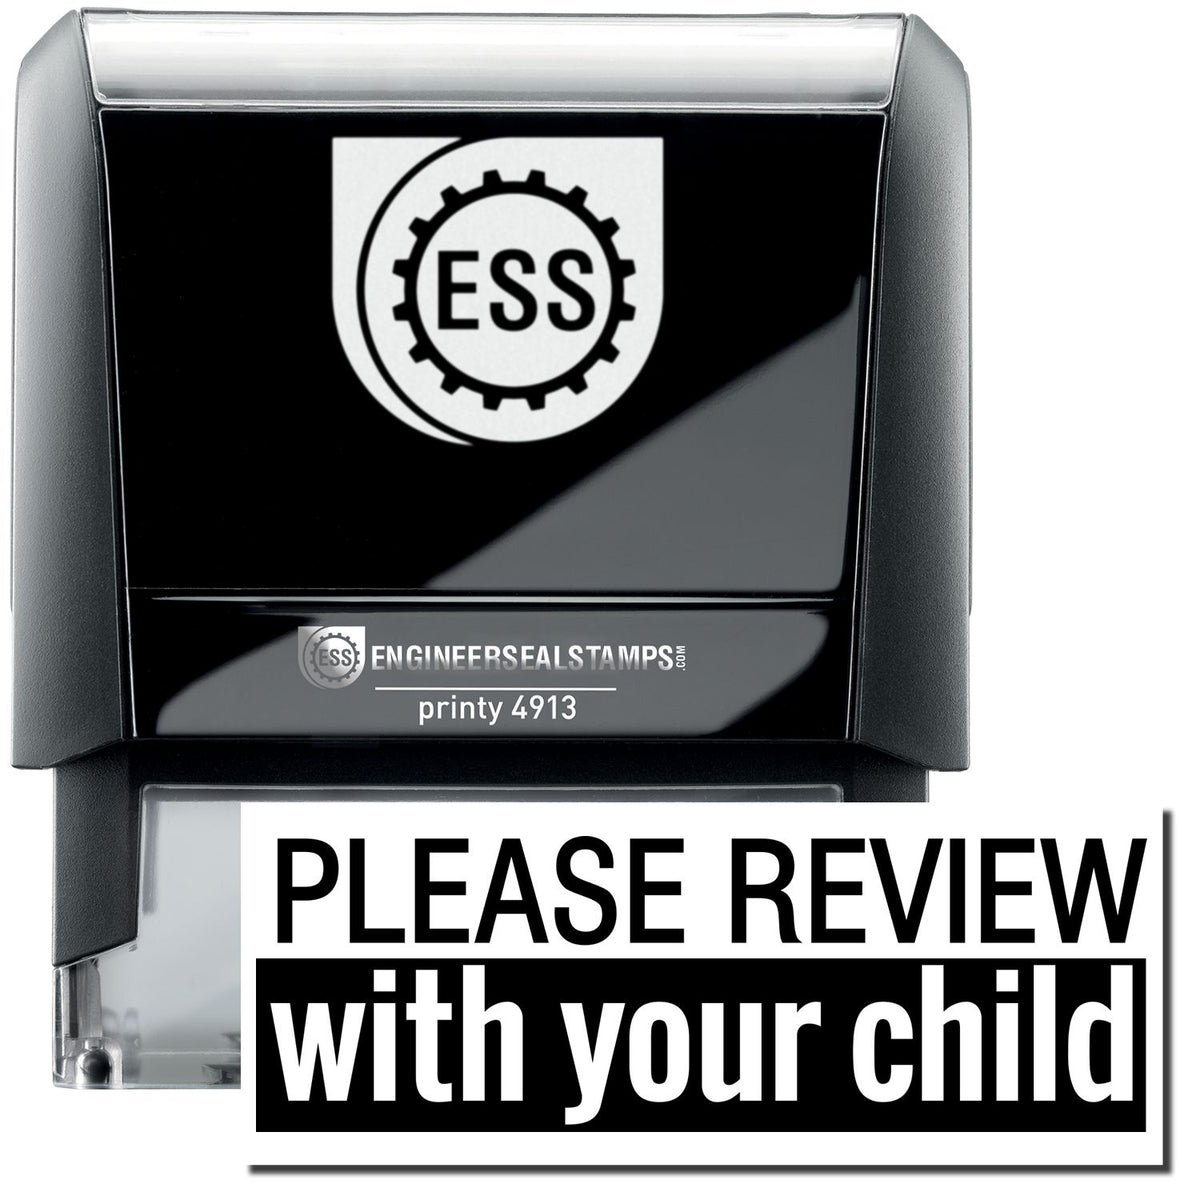 A self-inking stamp with a stamped image showing how the text &quot;PLEASE REVIEW with your child&quot; (The text &quot;with your child&quot; is written inside the black box) in a large font is displayed by it after stamping.